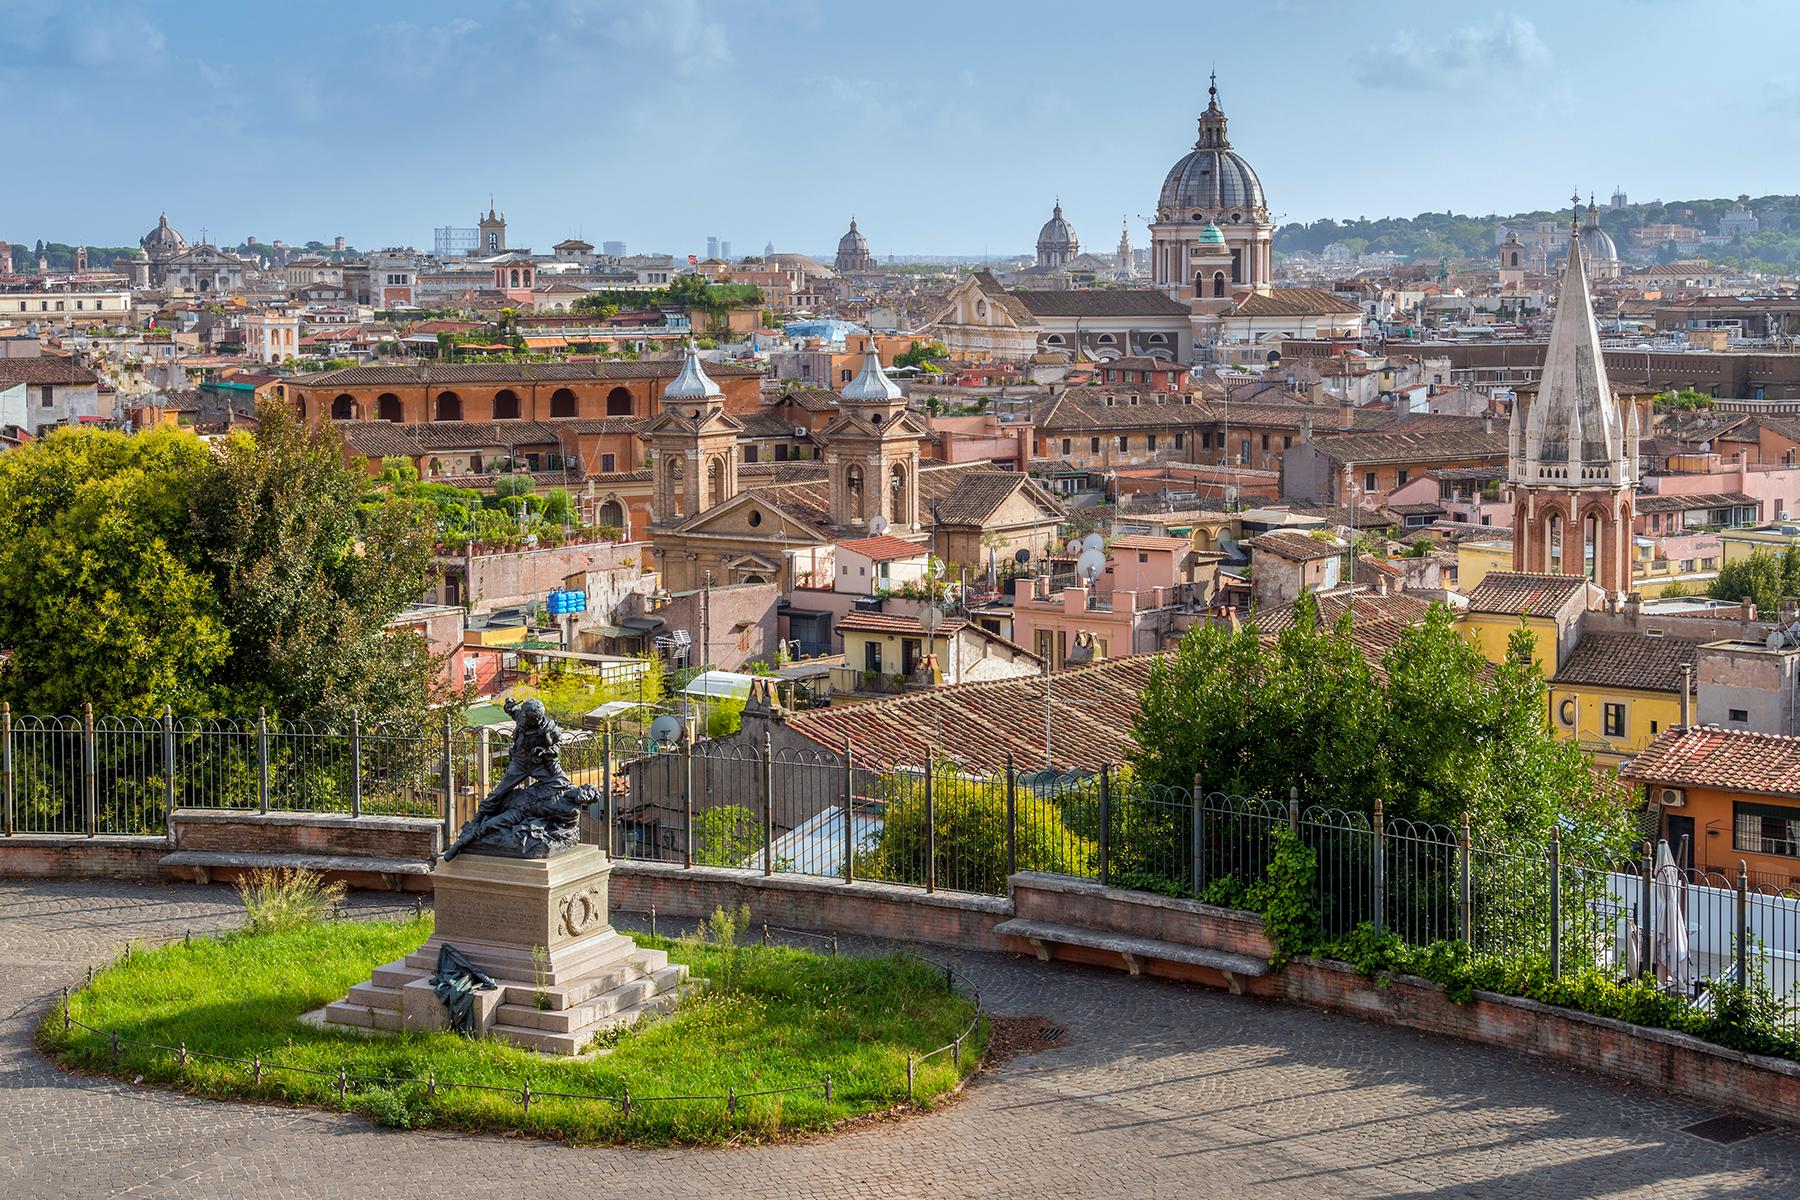 10 Under-the-Radar Things to Do in Rome